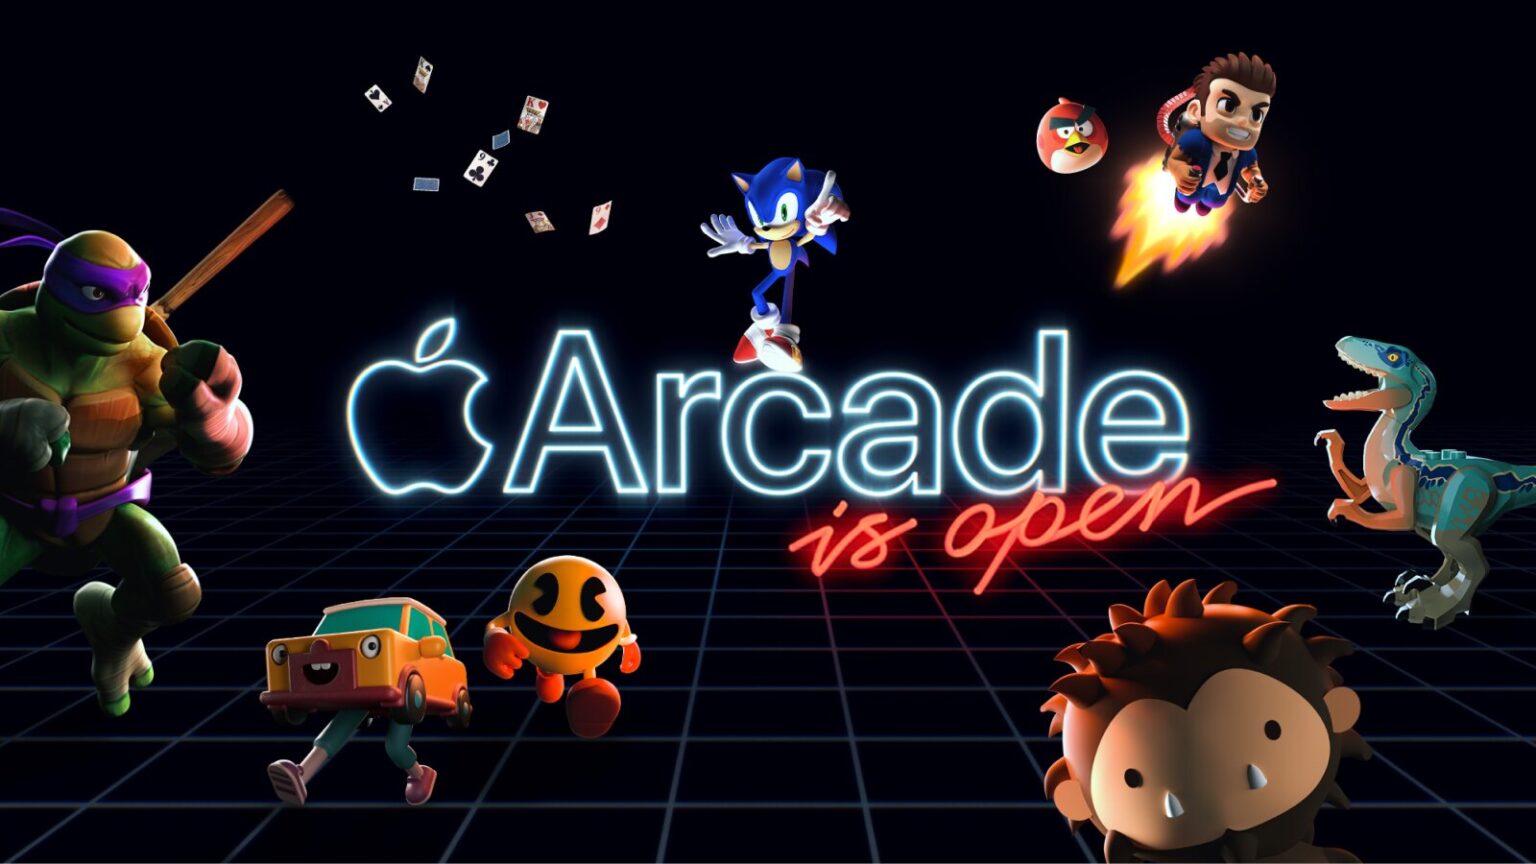 Iconic characters unite in exciting Apple Arcade gaming service